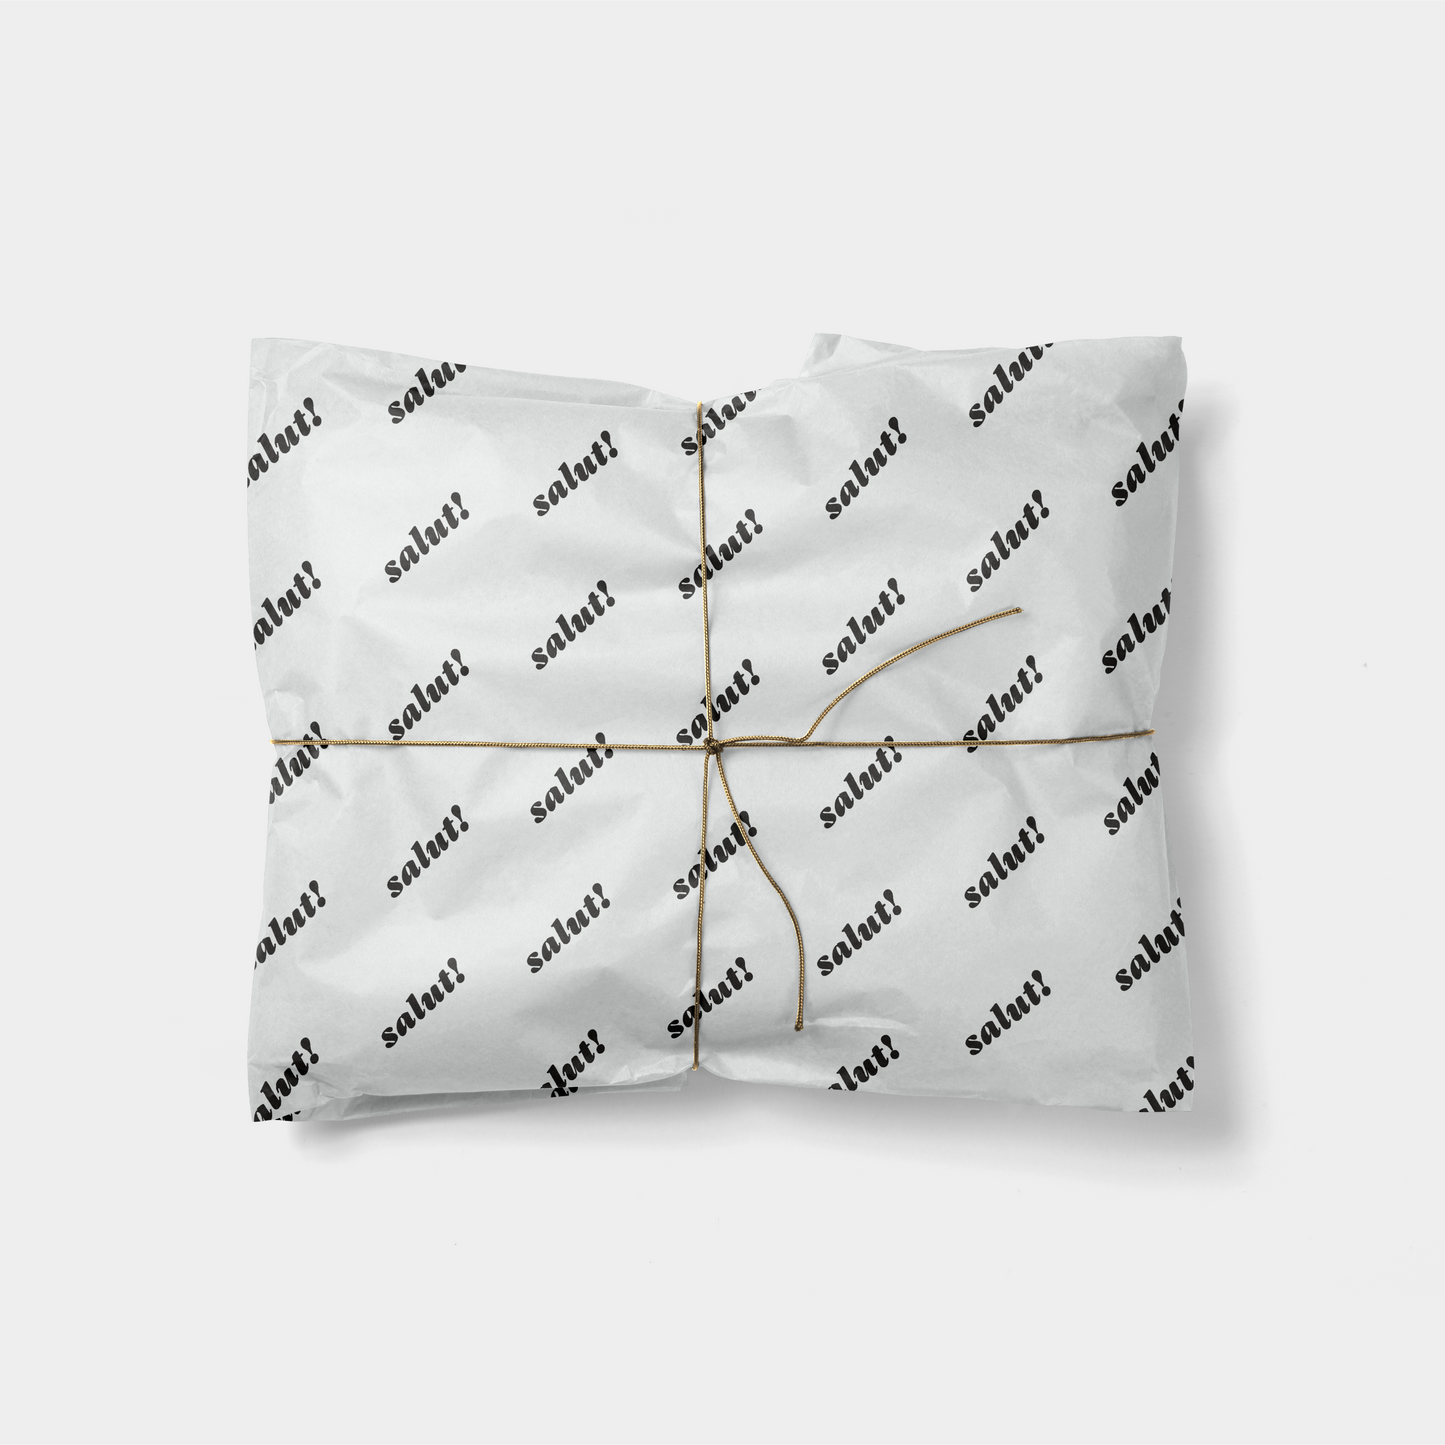 'Salut!' Custom Typography Gift Wrap-Gift Wrapping-The Design Craft